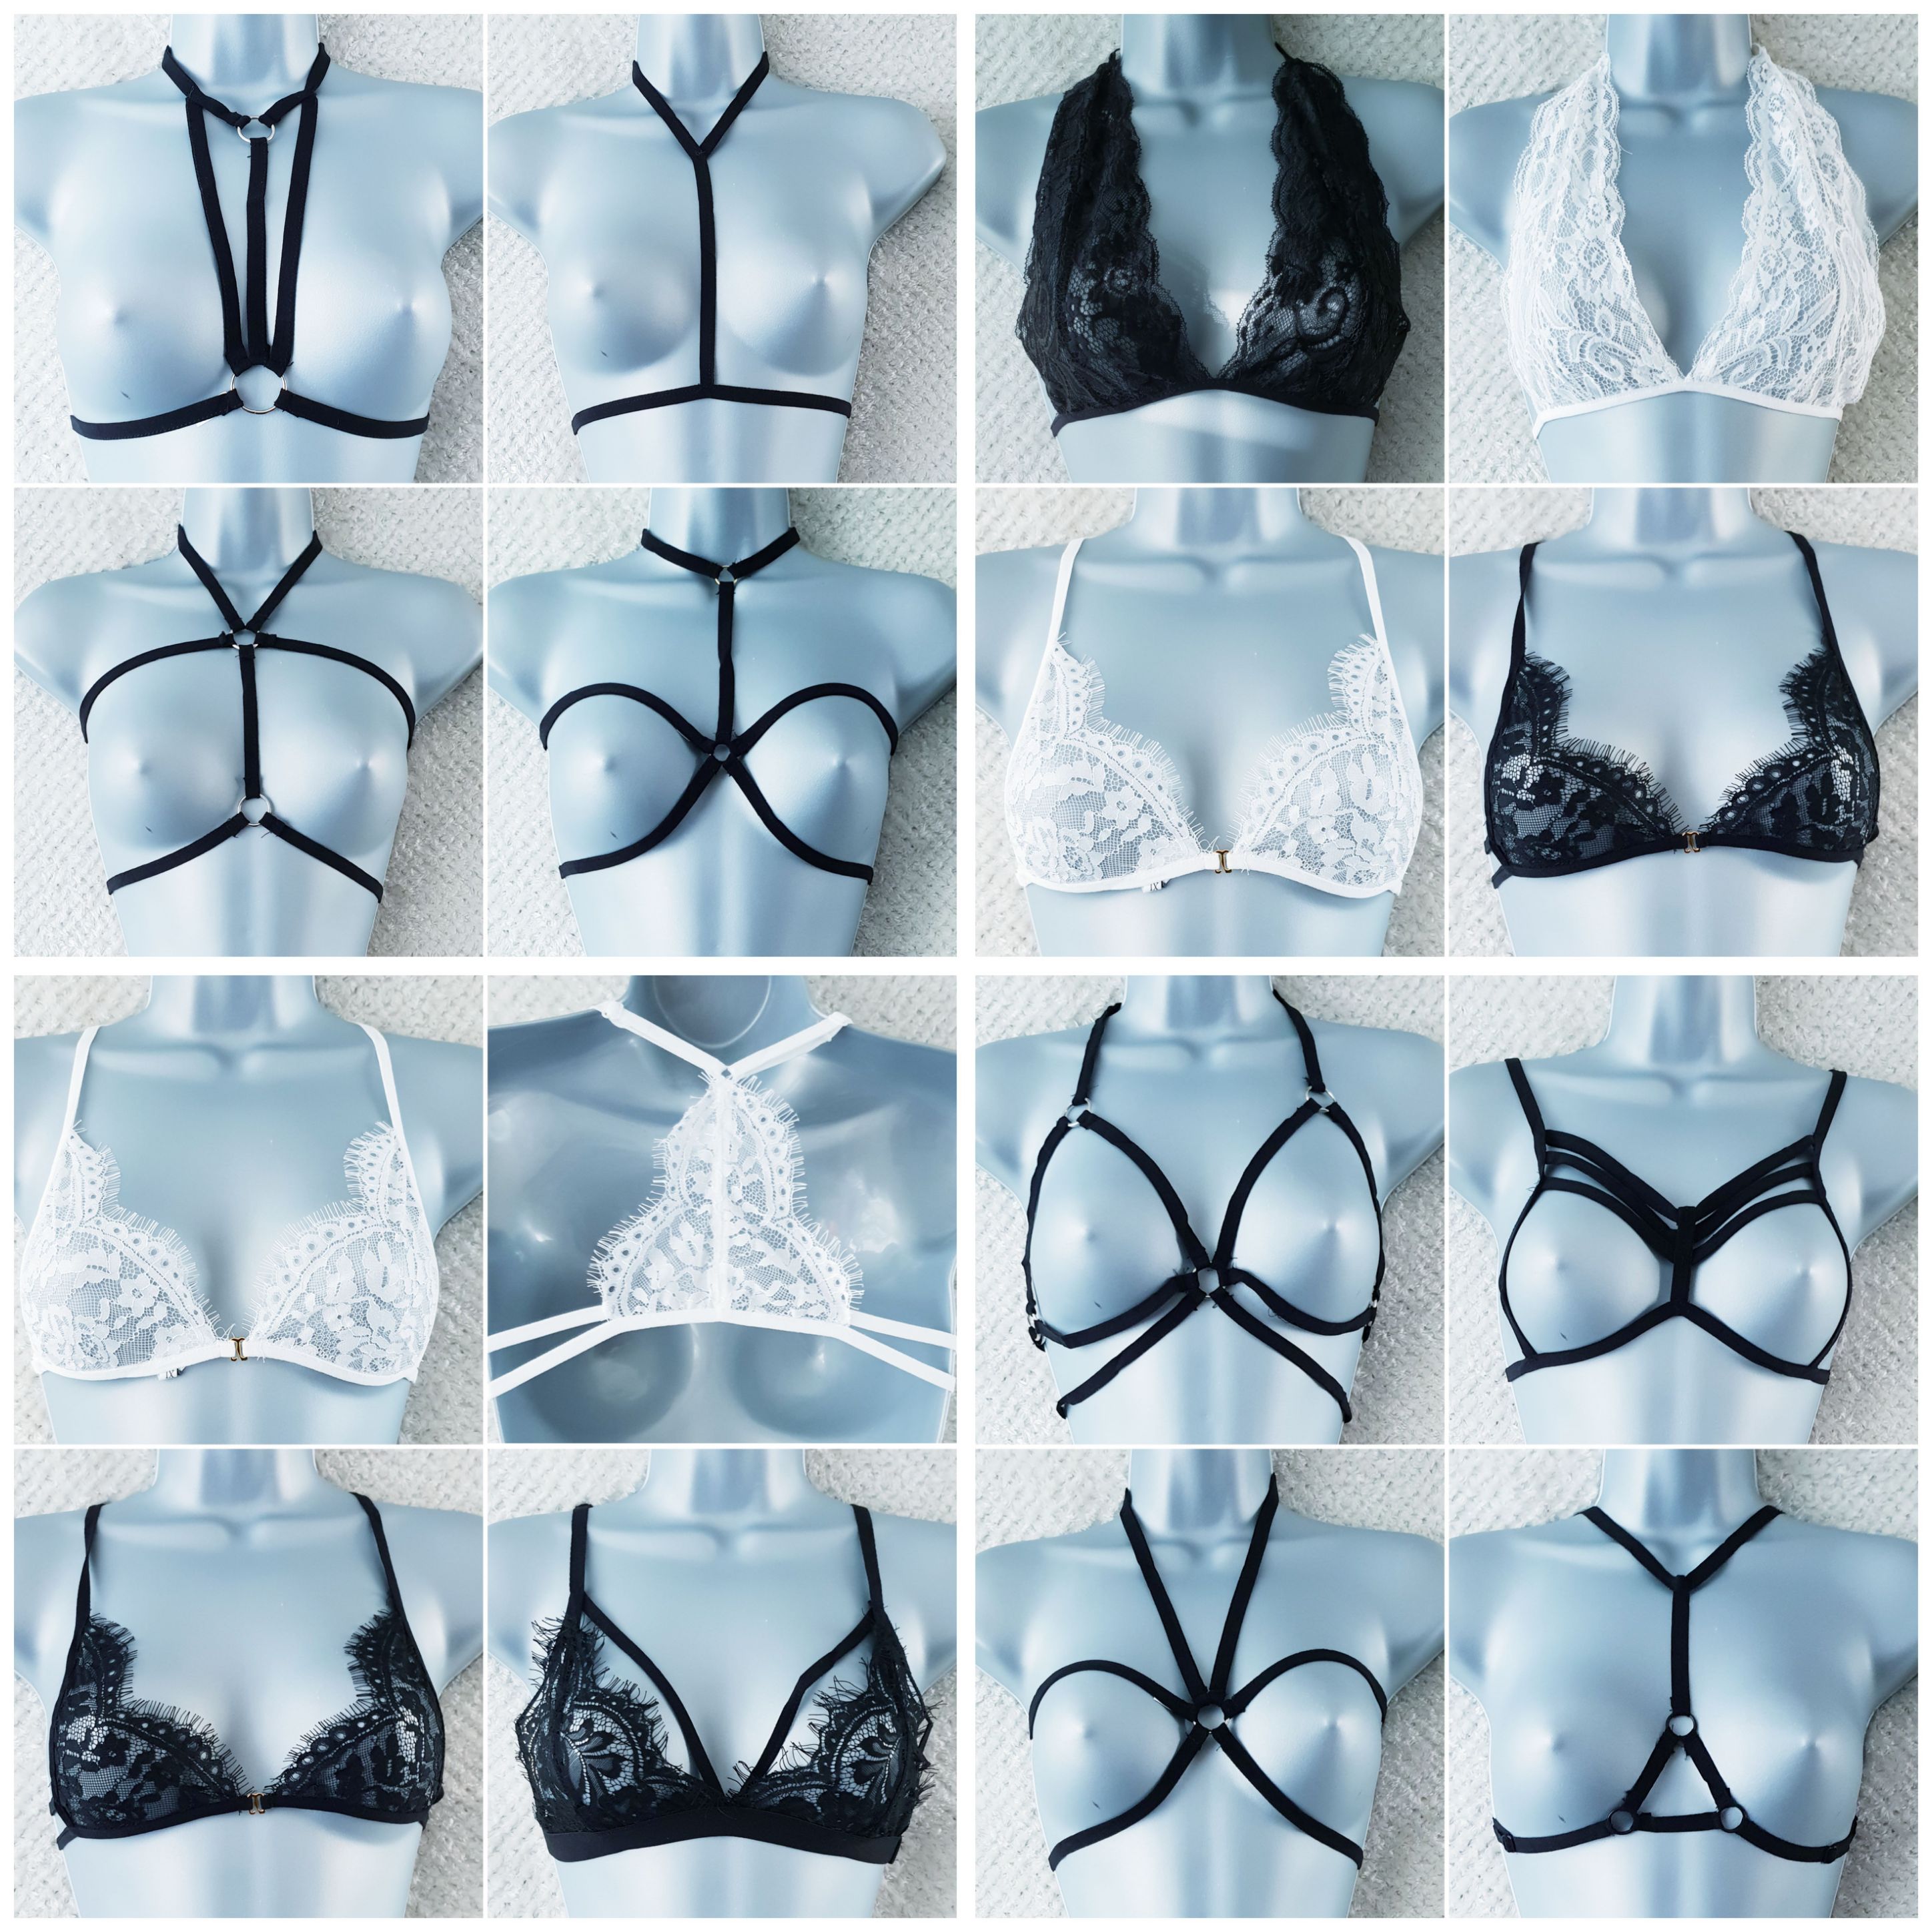 Cage & Lace Style Bras Lot 106 pcs in 12 designs S M L XL tagged